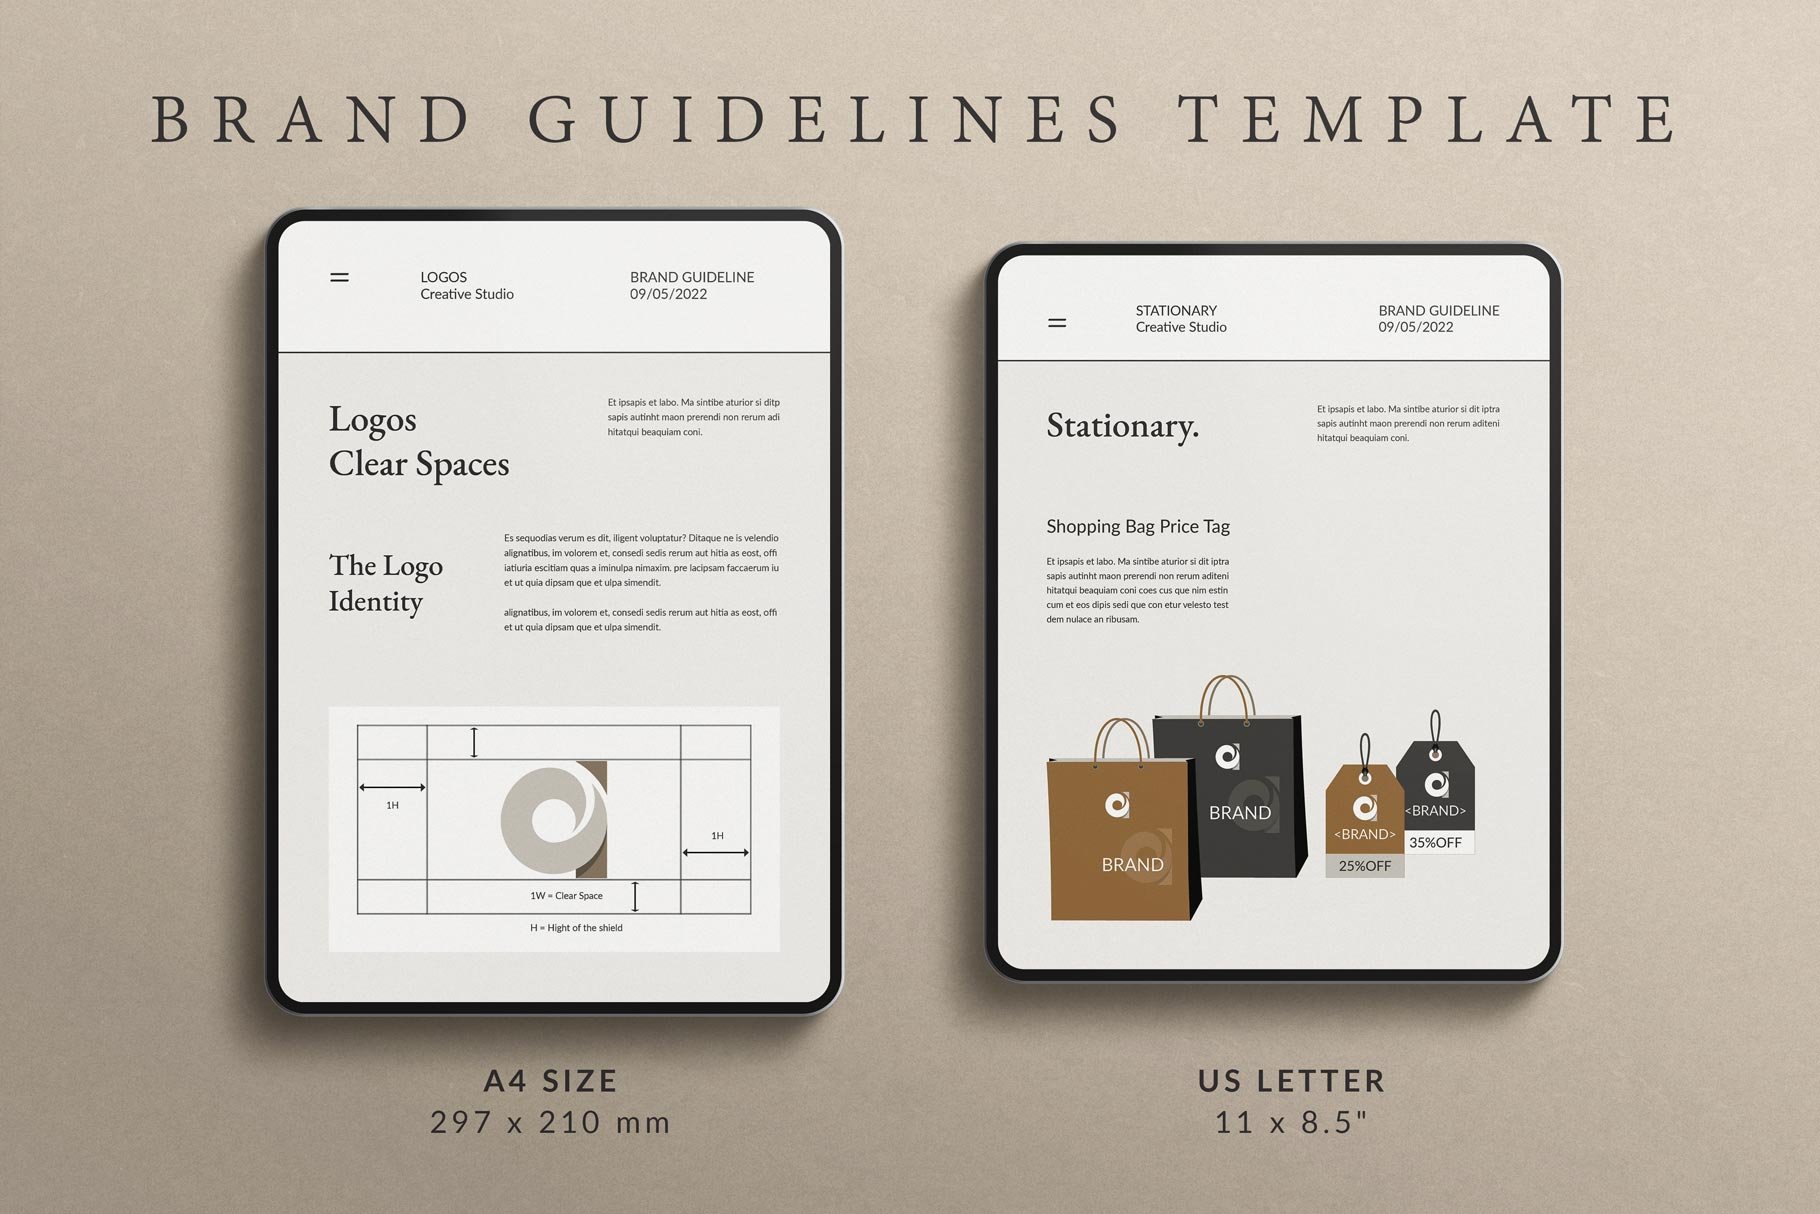 Brand Guidelines Template preview image.